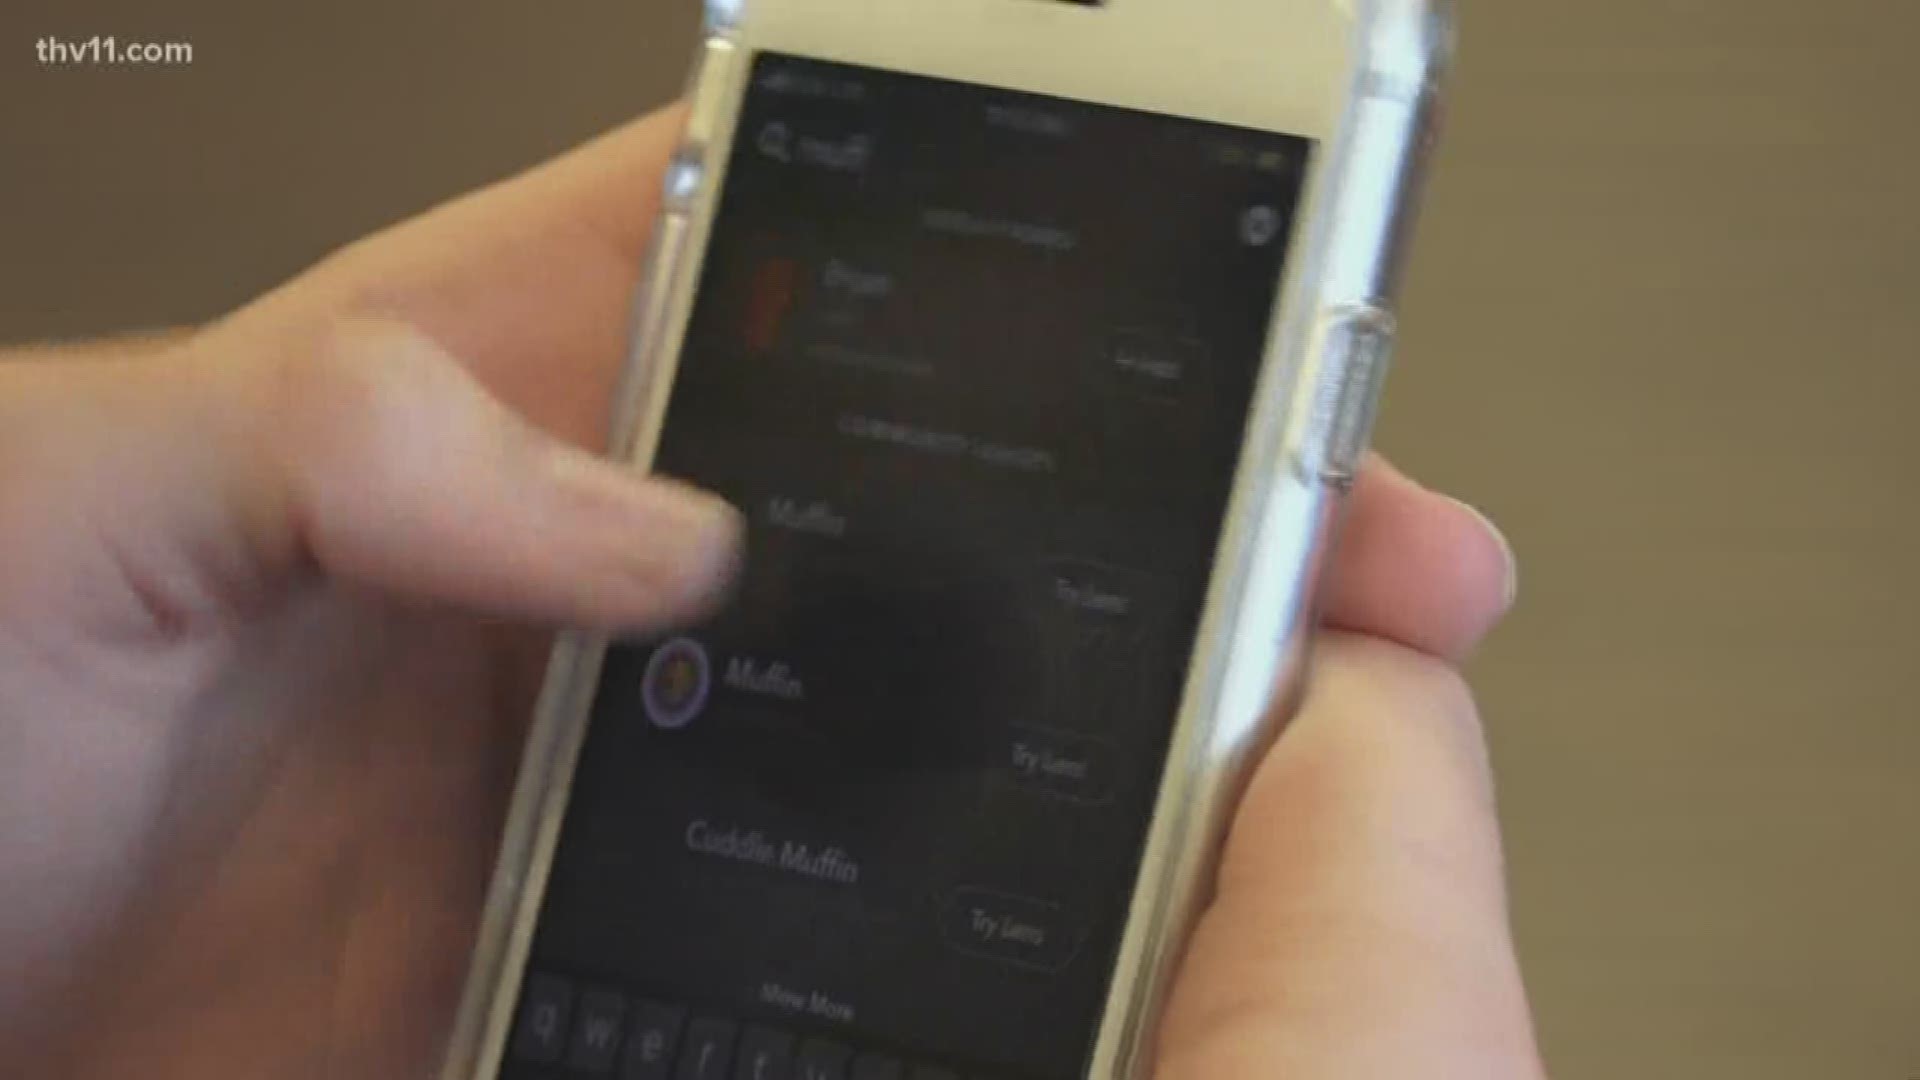 A Bauxite teacher just proved to his students why cell phones are banned in his classroom.